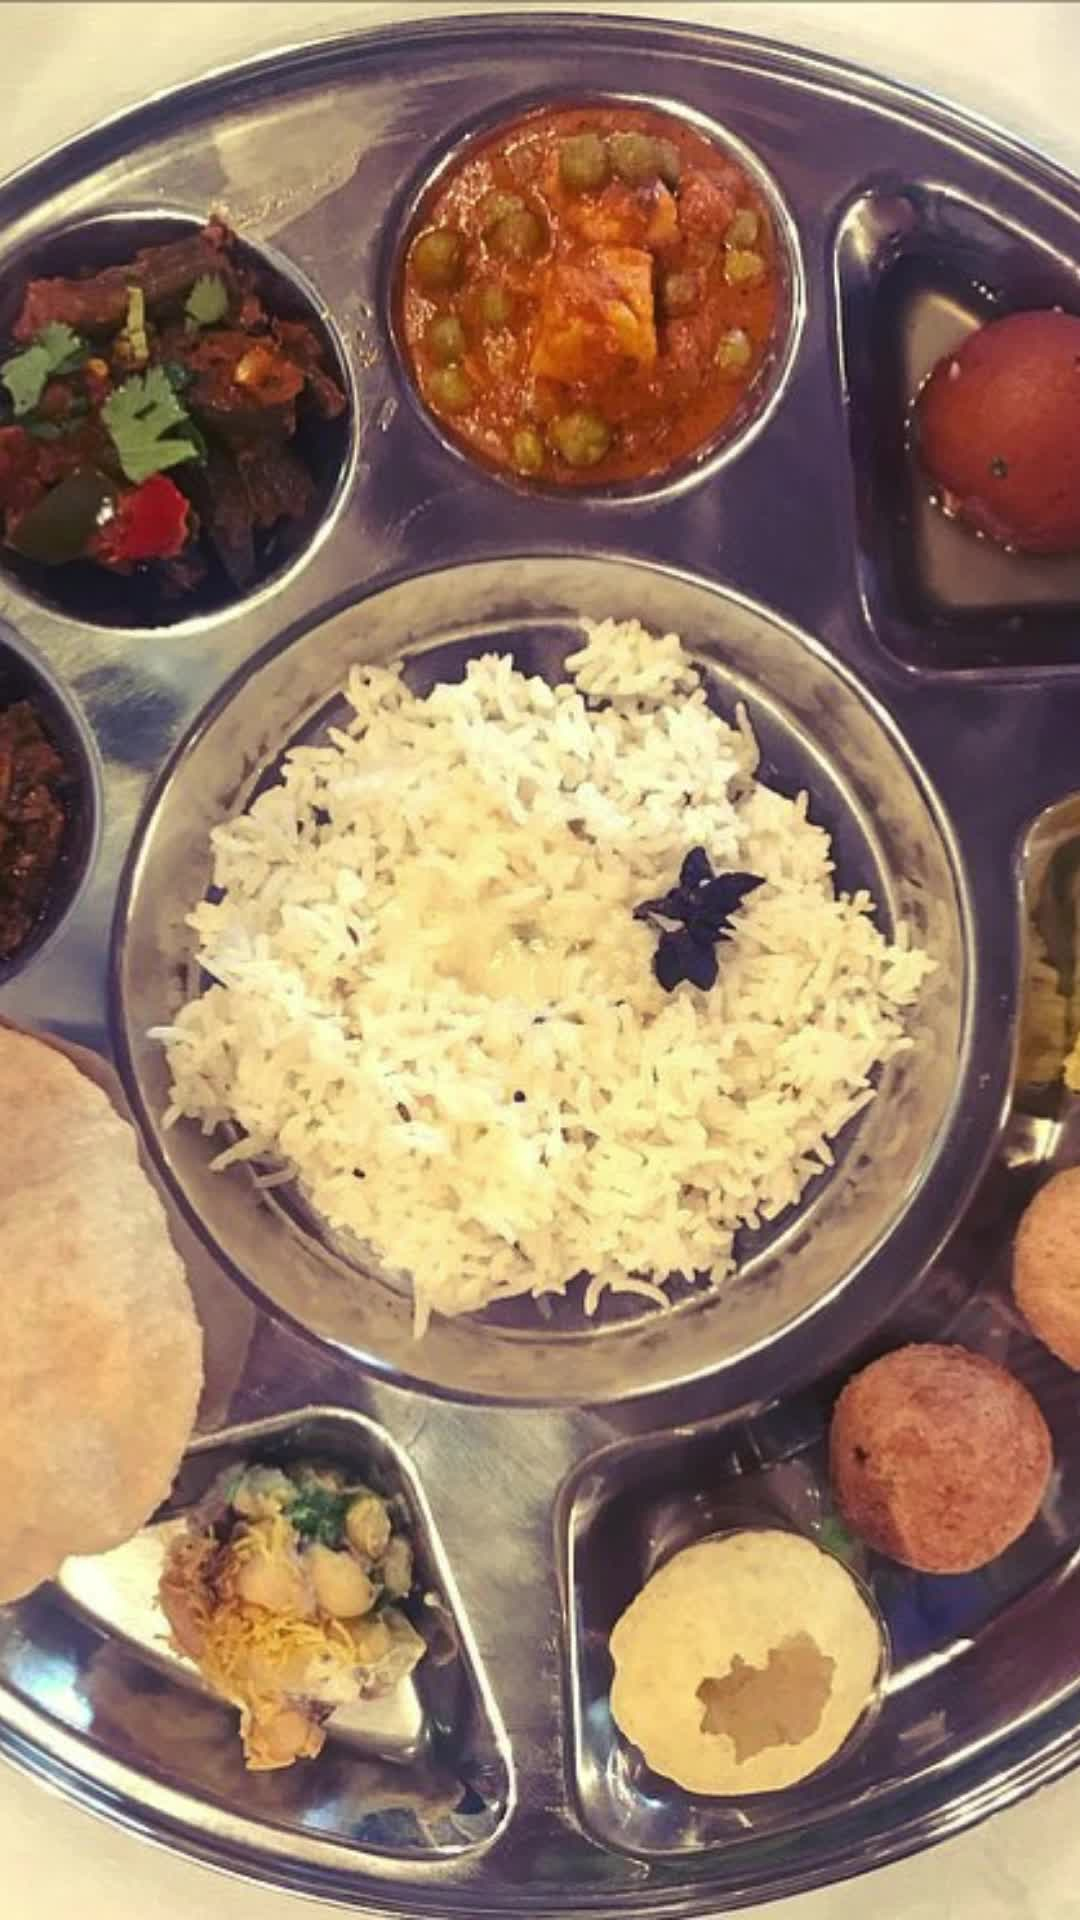 Our classic thali